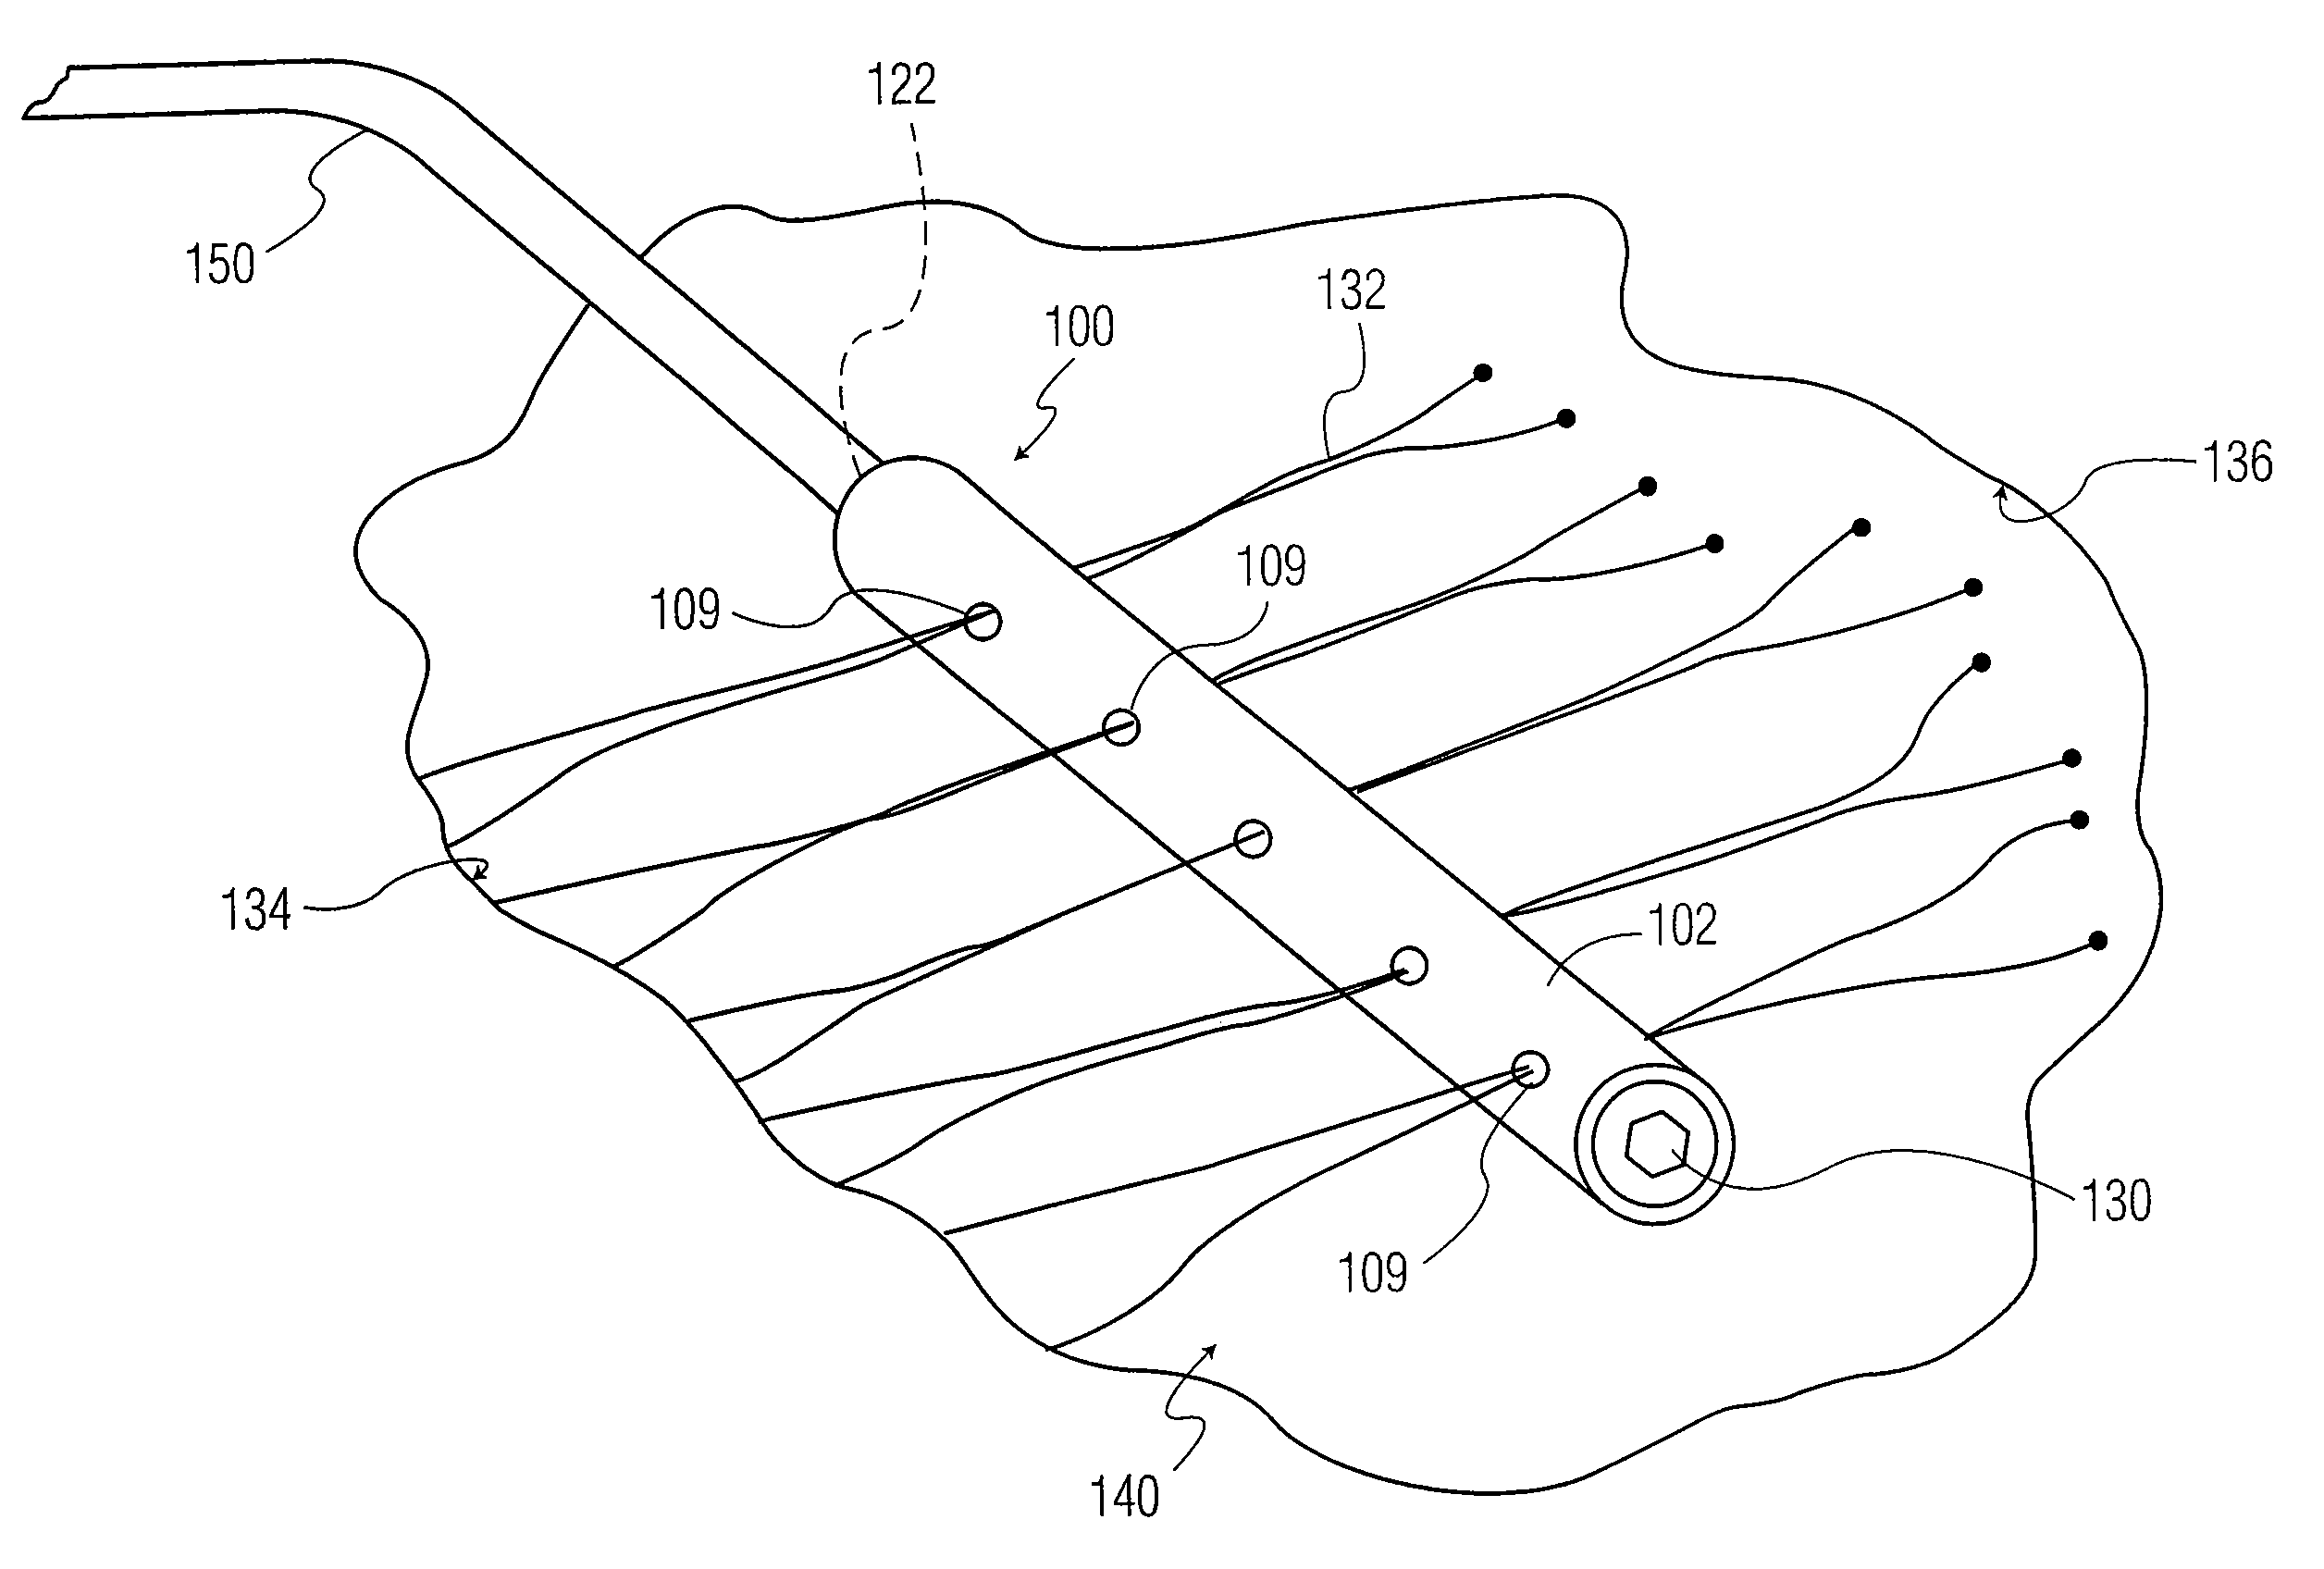 Method for treating a wound